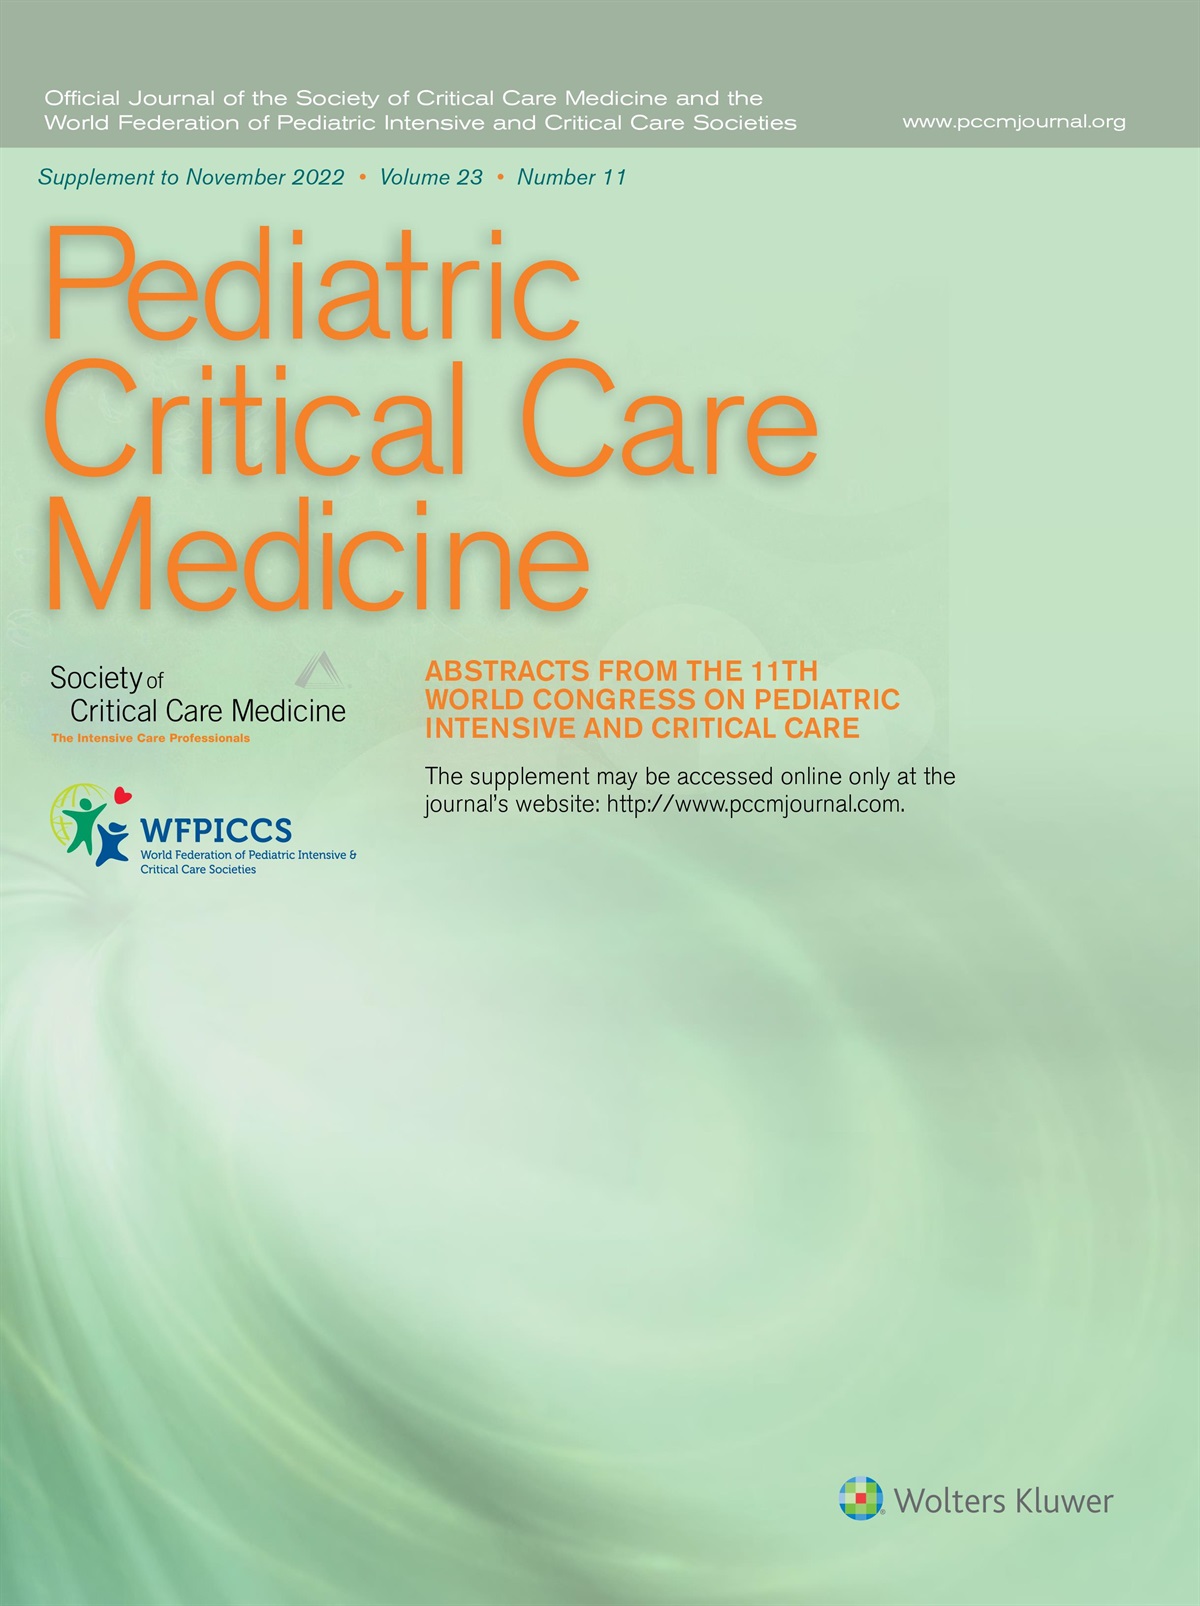 PP243 [Lung » Modalities of respiratory support]: EARLY HEATED HUMIDIFIED HIGH FLOW NASAL CANNULA OXYGEN SUPPORT IN CHILDREN WITH PNEUMONIA:A RANDOMISED CONTROLLED STUDY